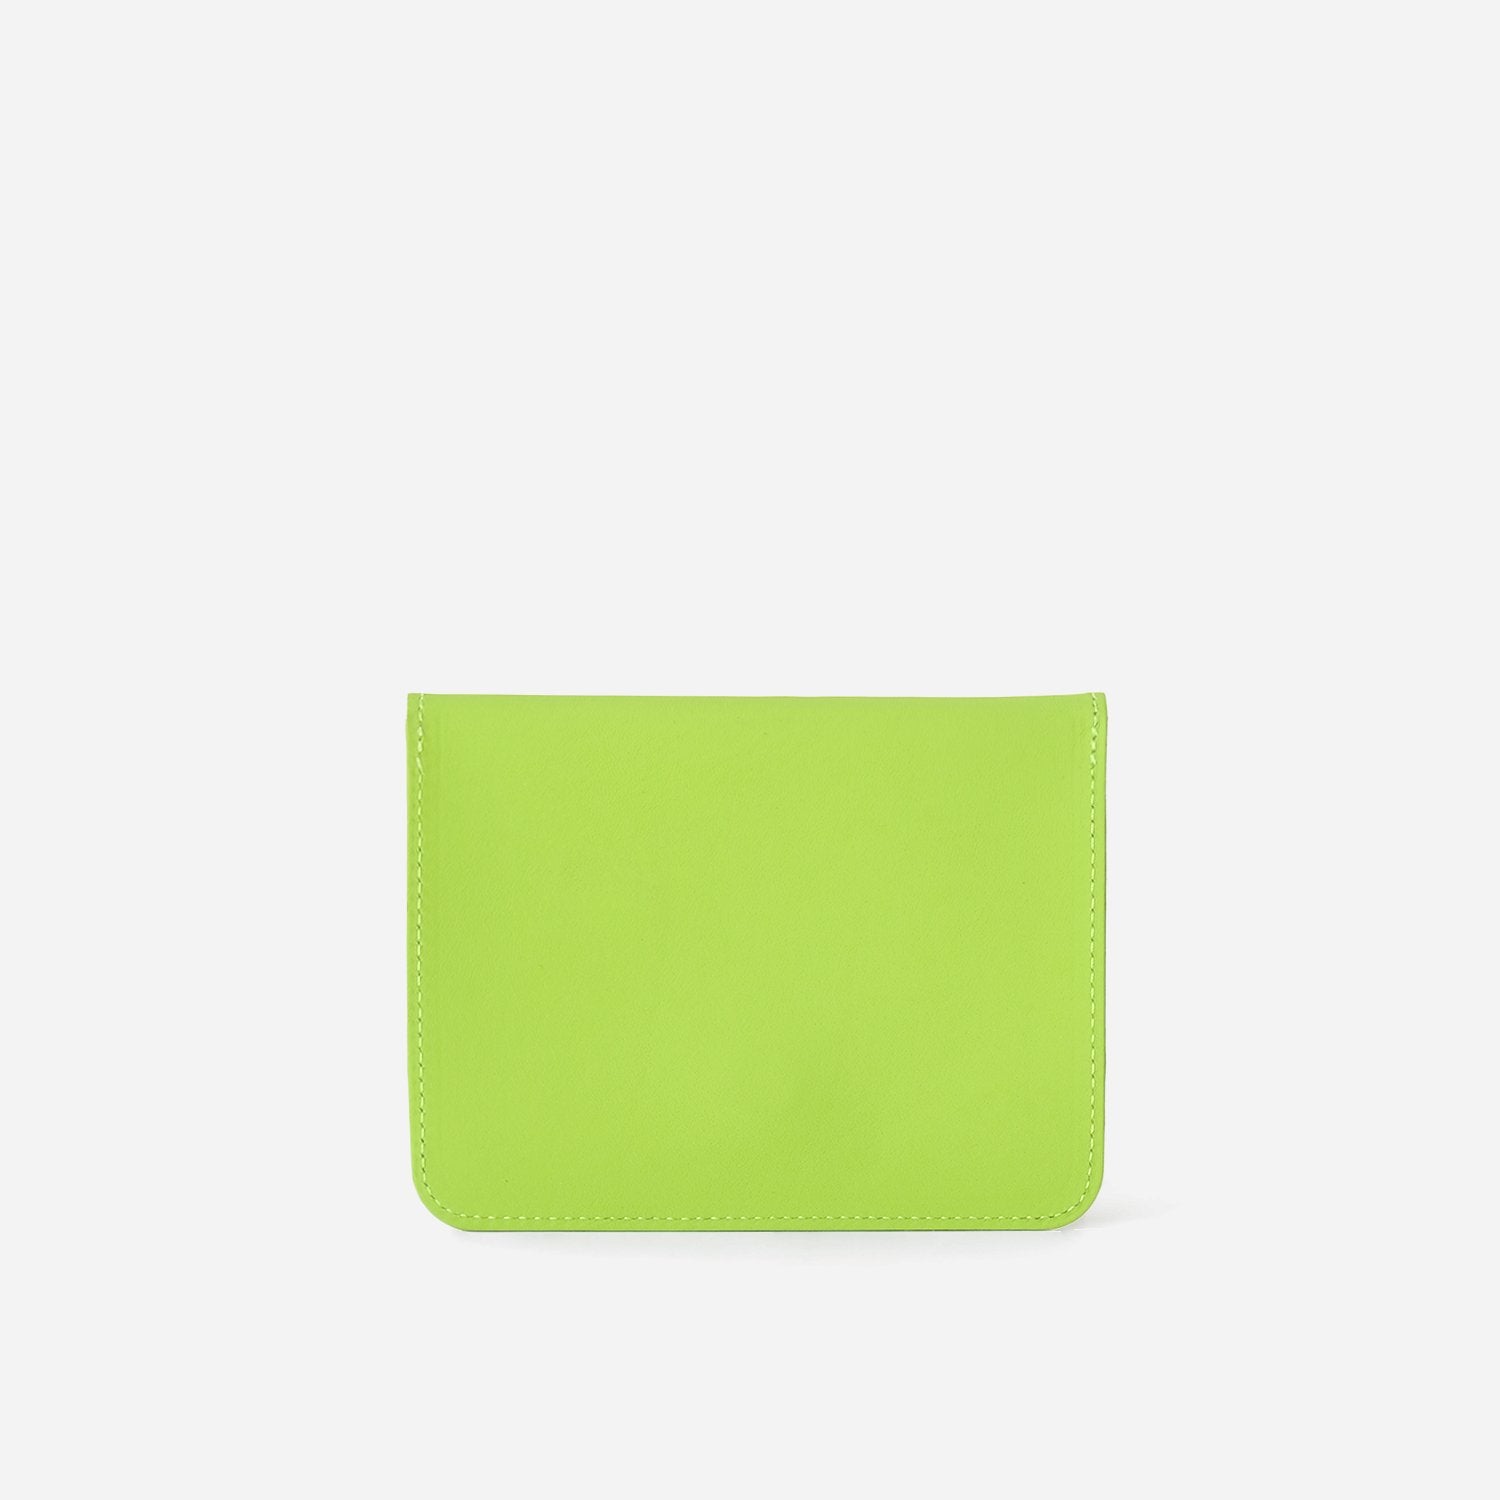 The Lunette Wallet - Lime